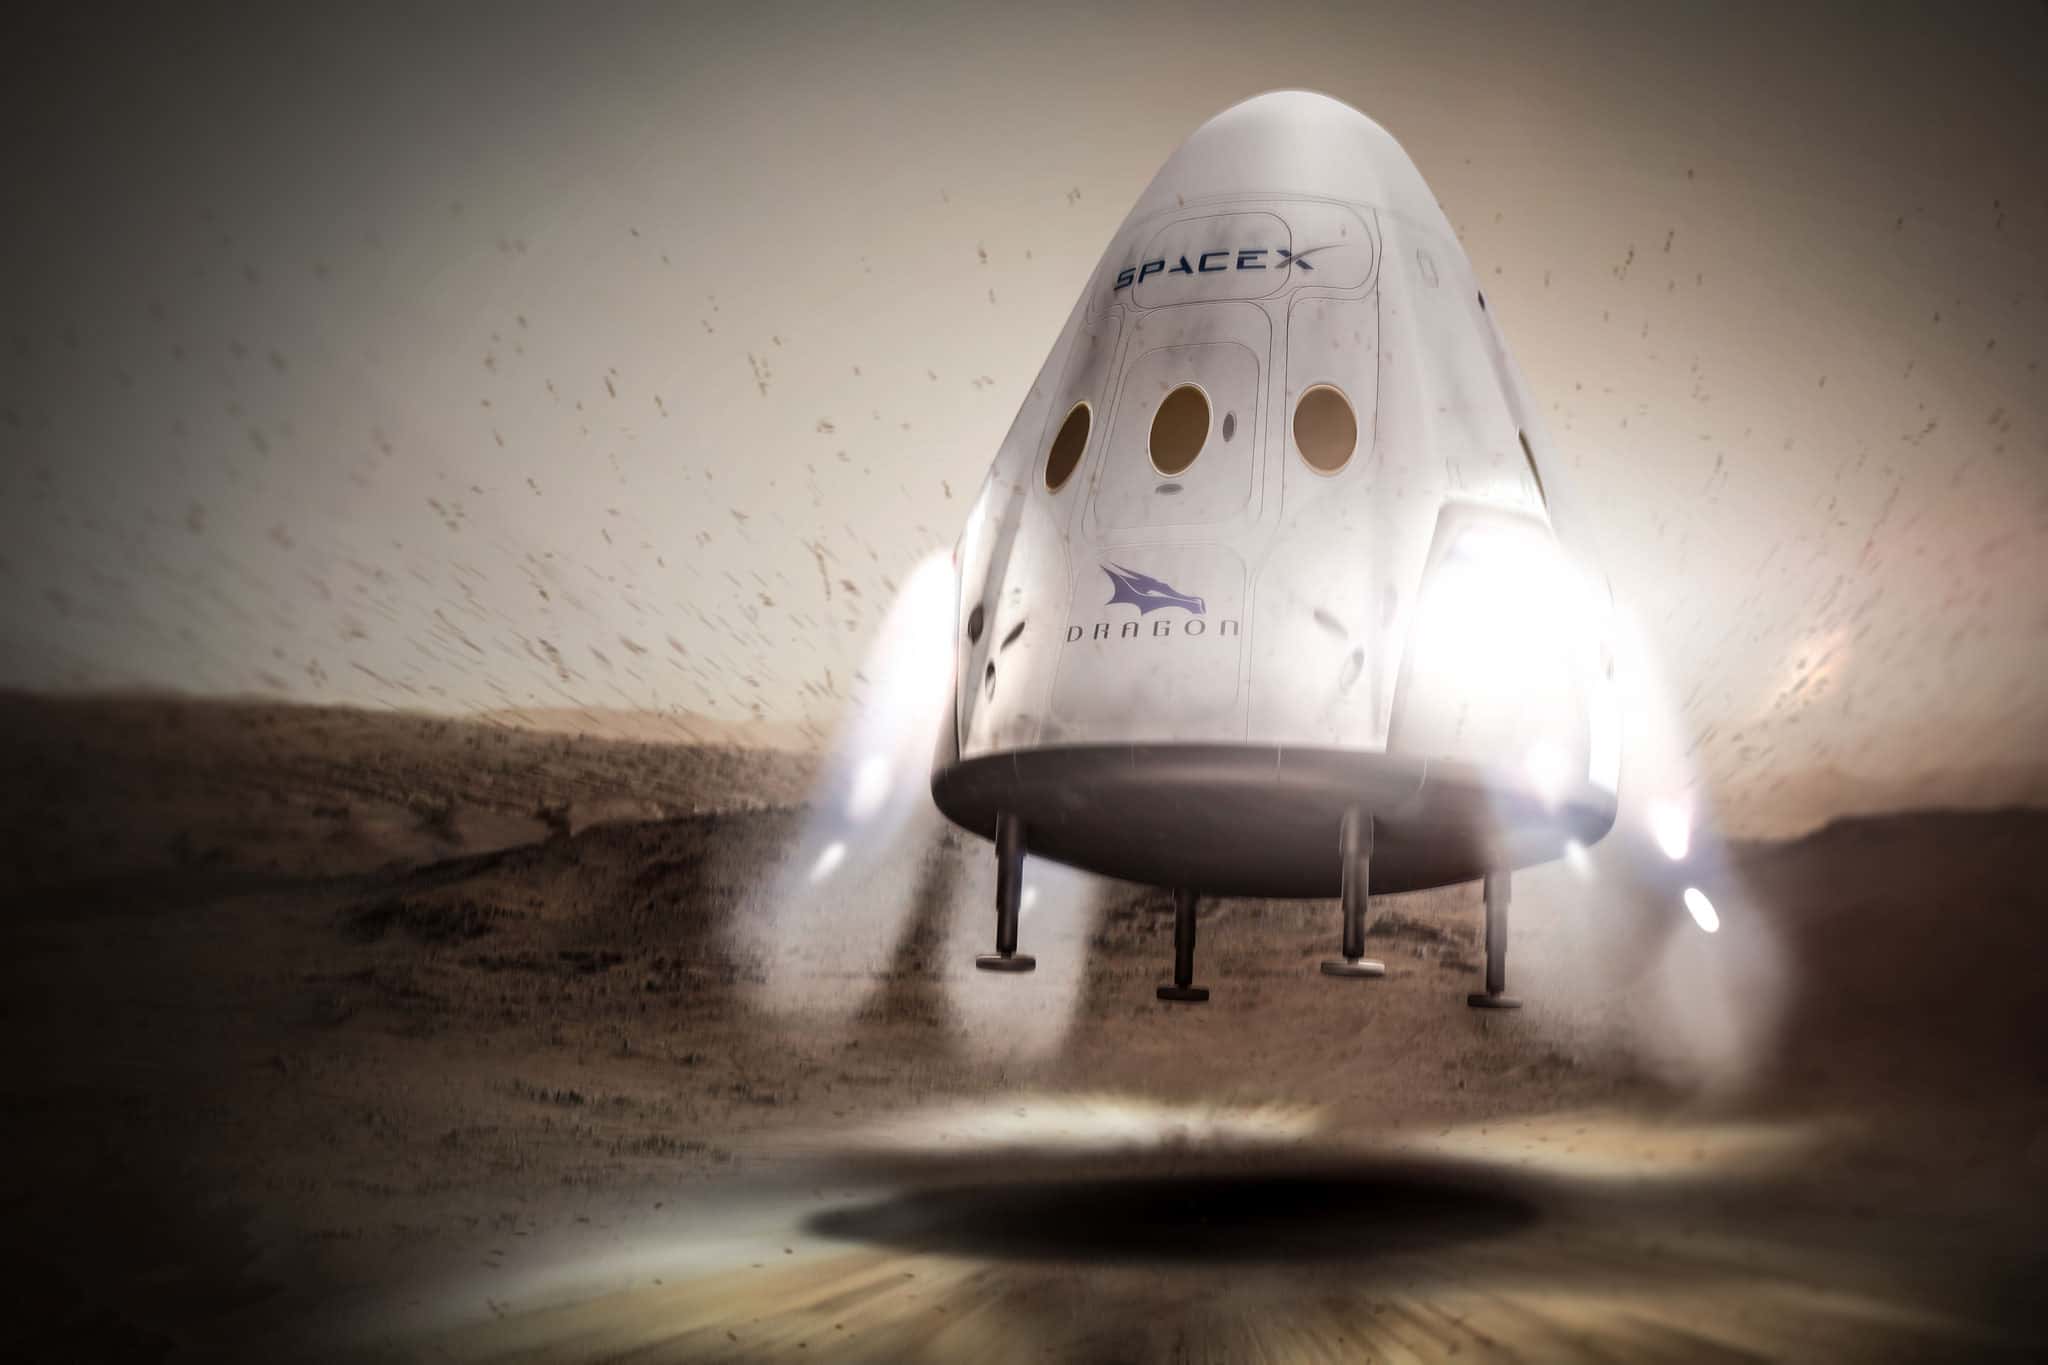 <p>SpaceX’s Mars landing is not a far-off pipe dream for them, in fact, they want it to occur as early as 2022. At that point, the plan is to send cargo to Mars and evaluate the conditions, resources, and hazards associated with sending humans up. After putting in the infrastructure to support human life, they intend on sending people to populate a happy little city up there not long after. I want to see Bob Ross’s oil painting tutorials of THAT landscape!</p>